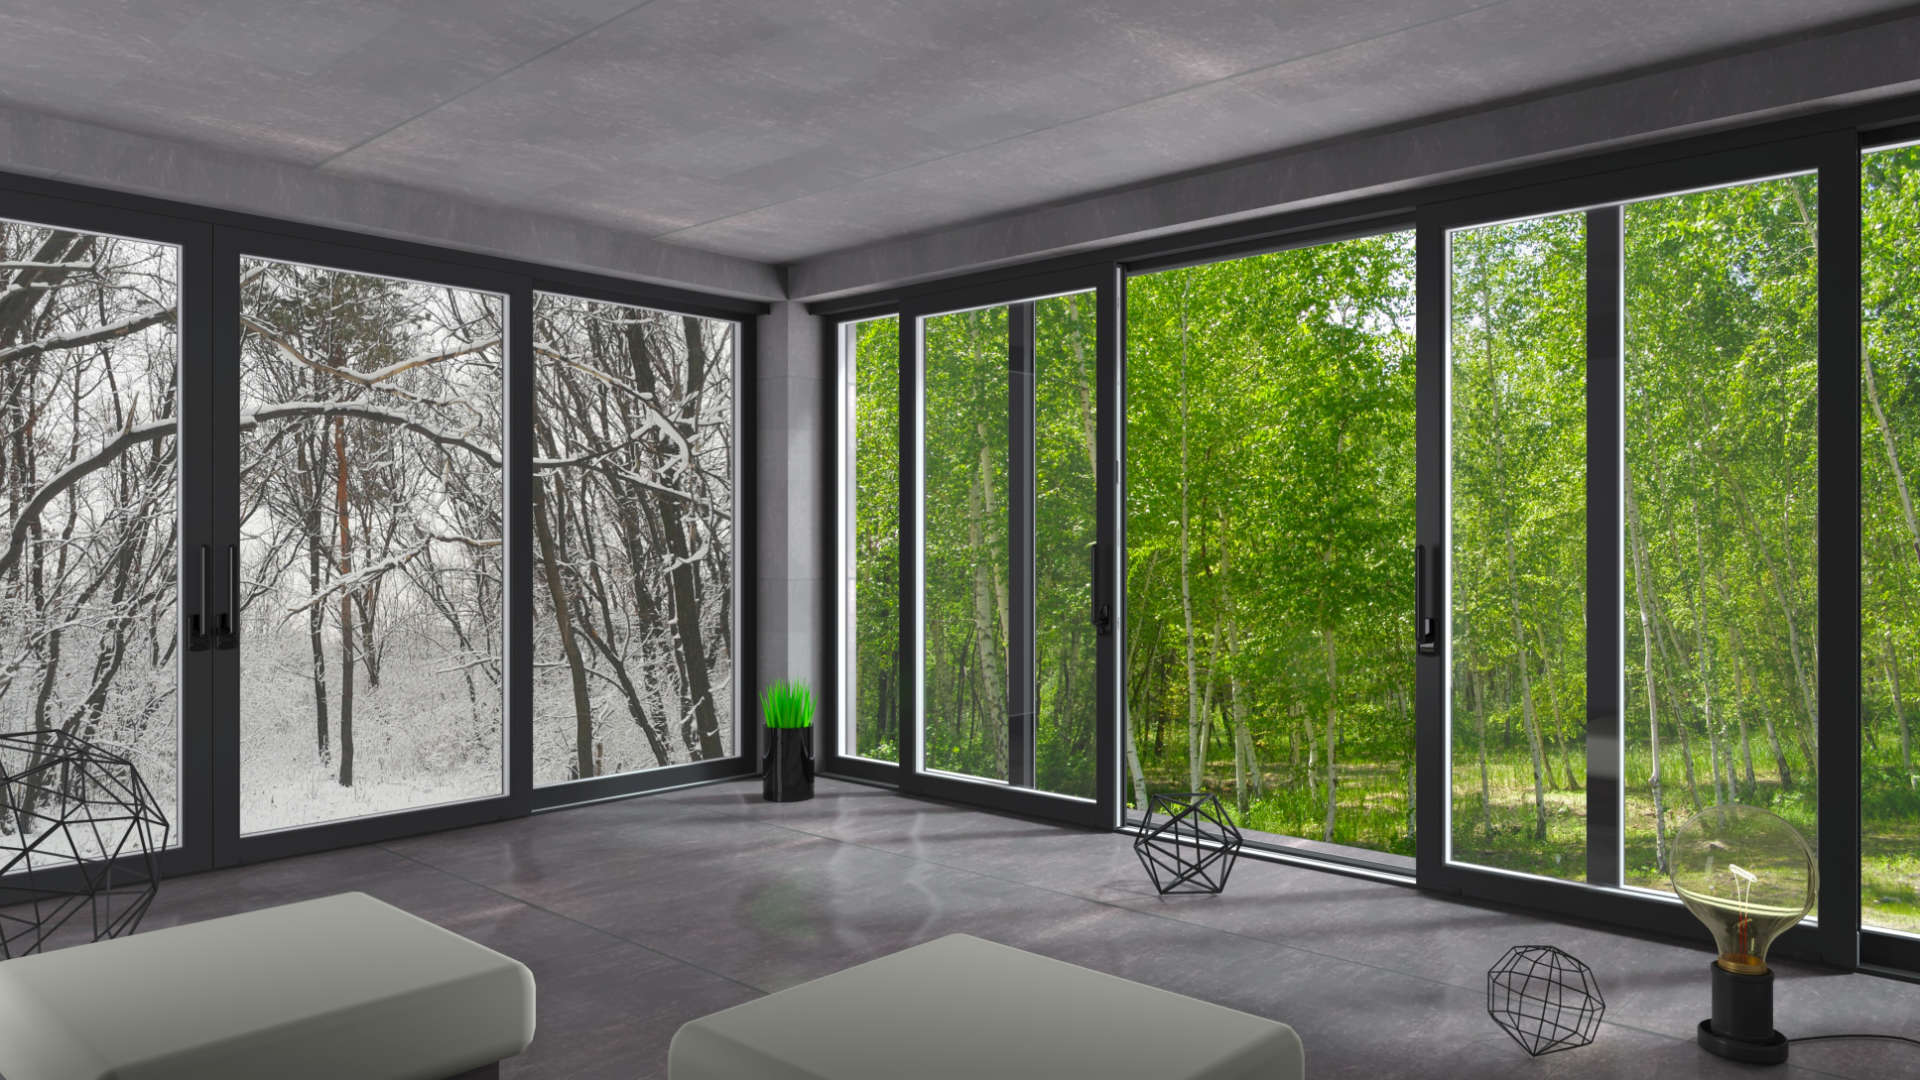 WHICH WINDOWS ARE BEST FOR YOU? ALUMINIUM, UPVC OR WOODEN WINDOWS?